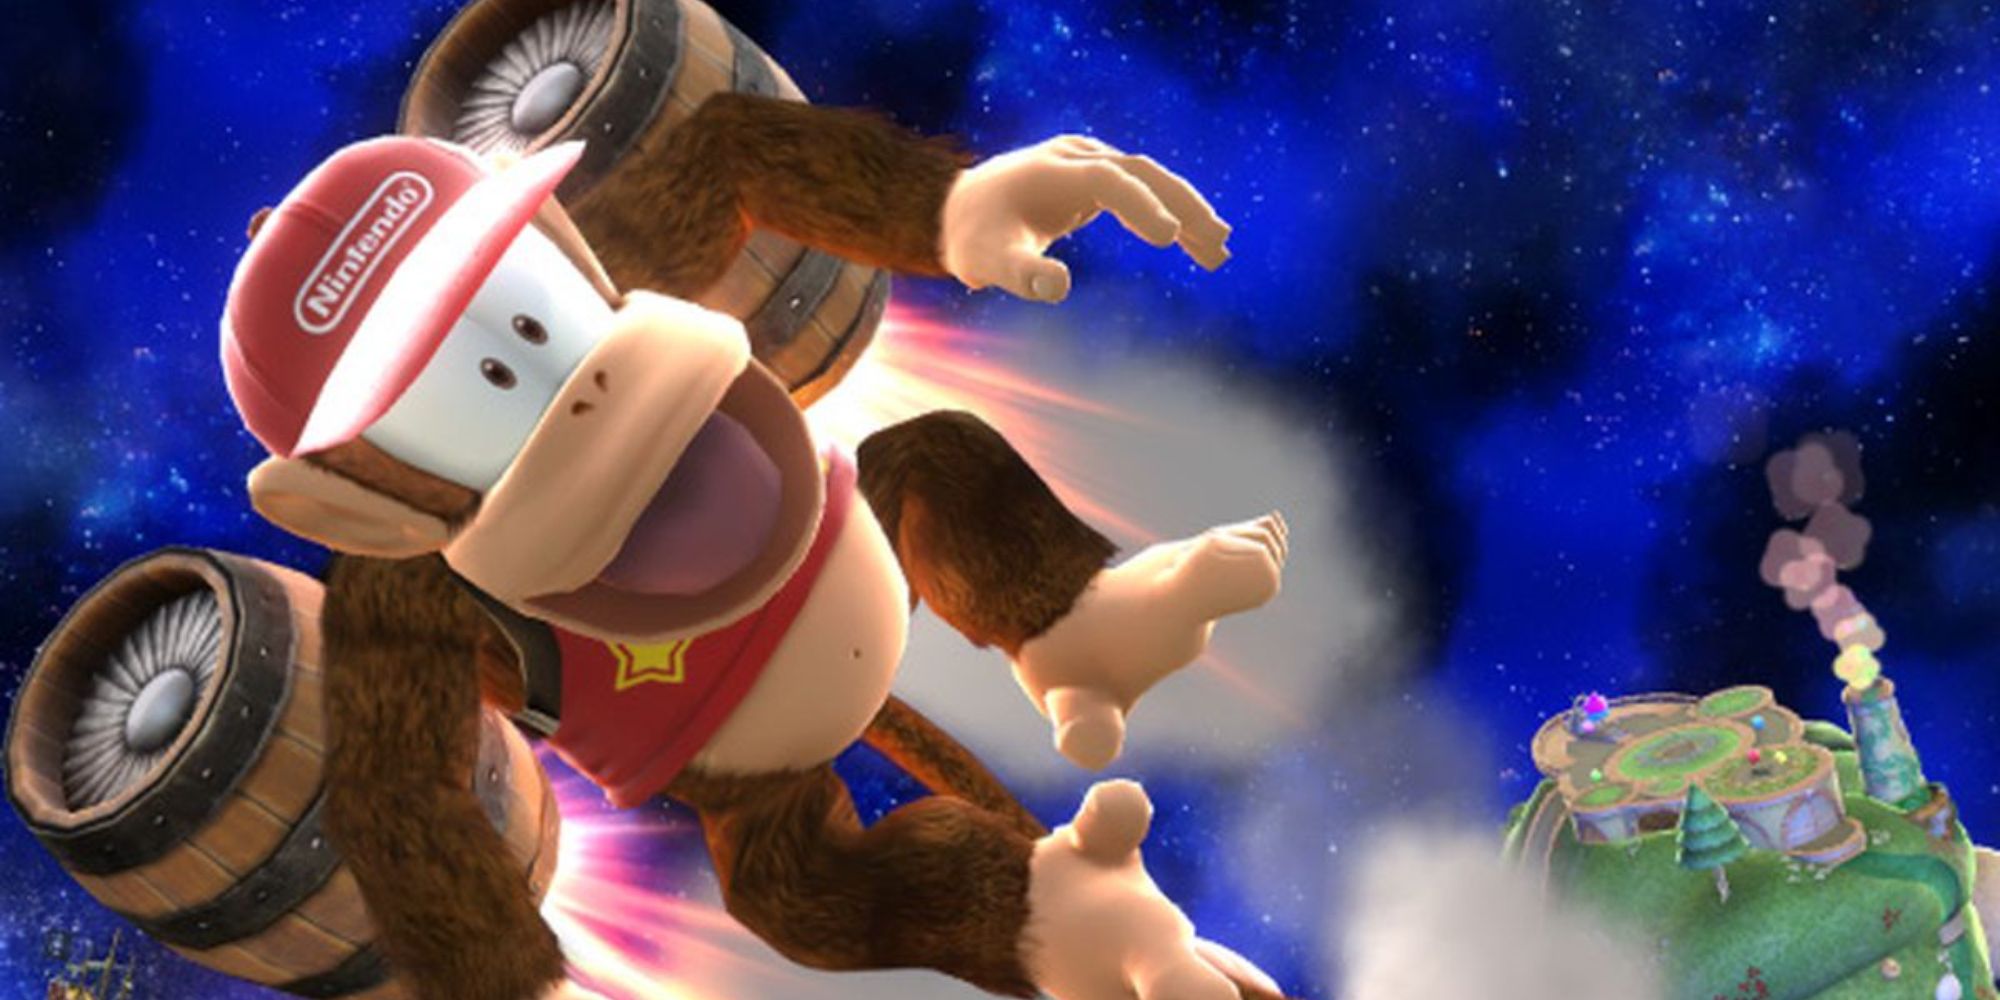 Diddy flying on his rocket pack in Smash Bros